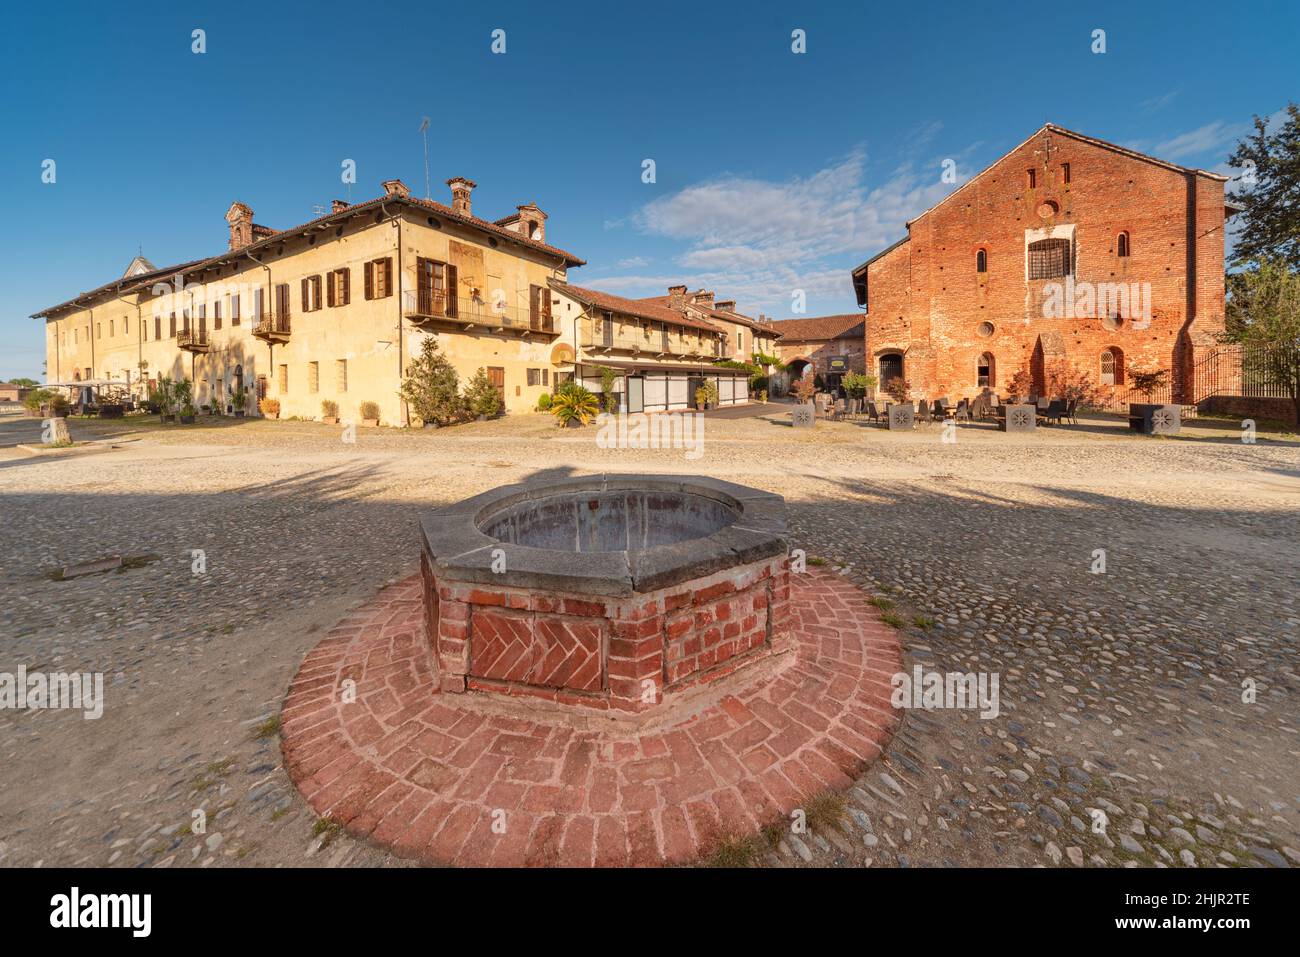 Staffarda di Revello, Saluzzo, Italy - October 8, 2021: the Staffarda Abbey guesthouse with the refectory, dormitory, horse shelter and the well in th Stock Photo